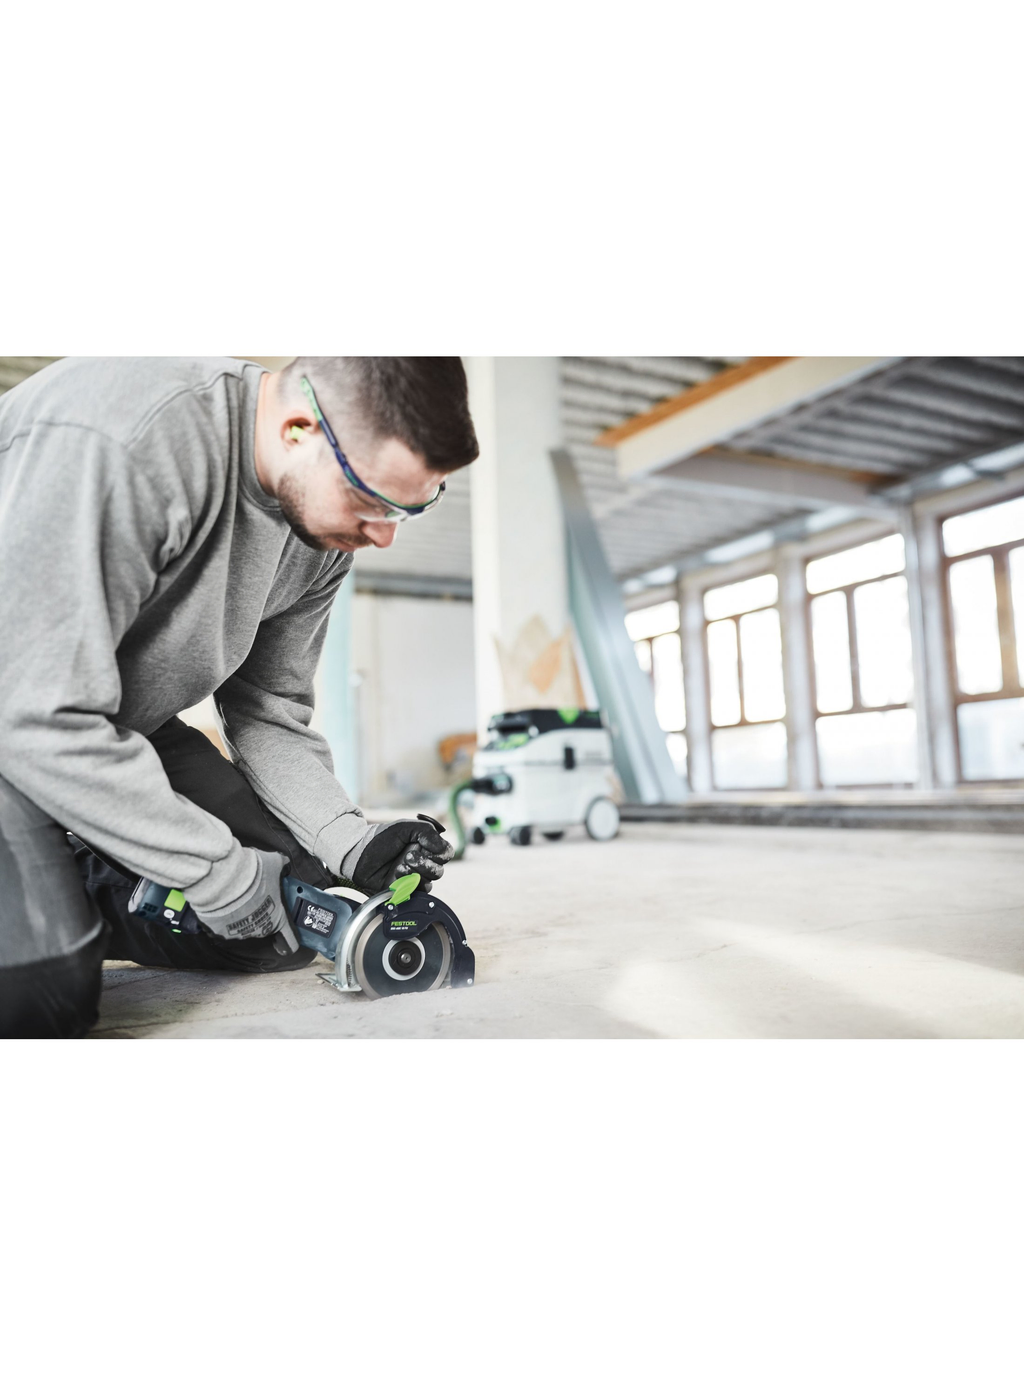 This Festool cordless tile grinder is perfect for dust-free cutting minerals indoors. Easy and affordable rental with BIYU.